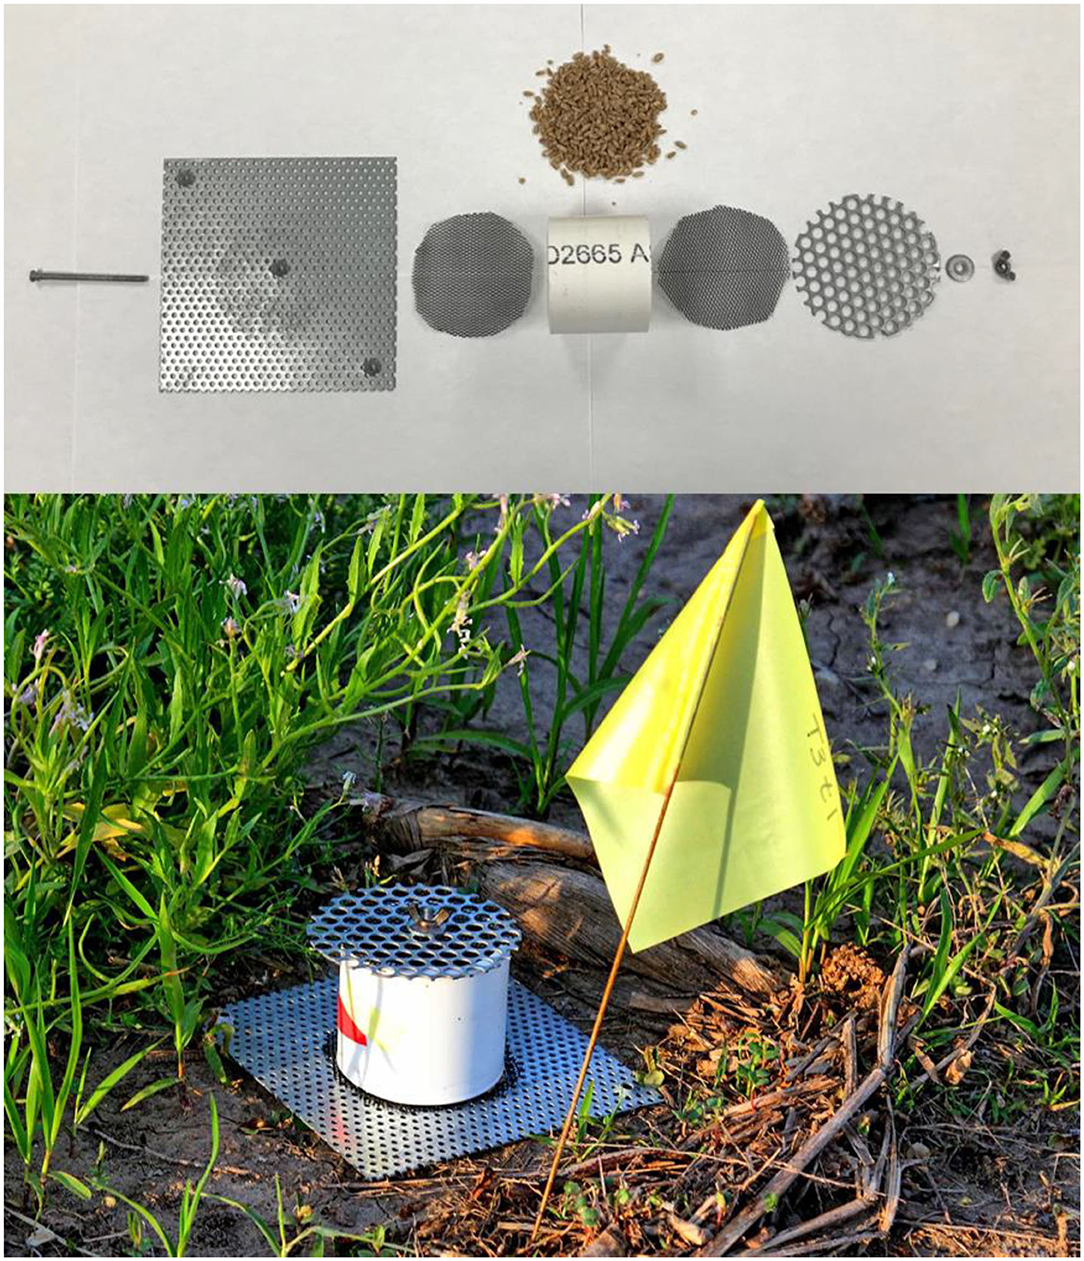 Figure showing types of insect traps: A. Pheremone trap, B:Light